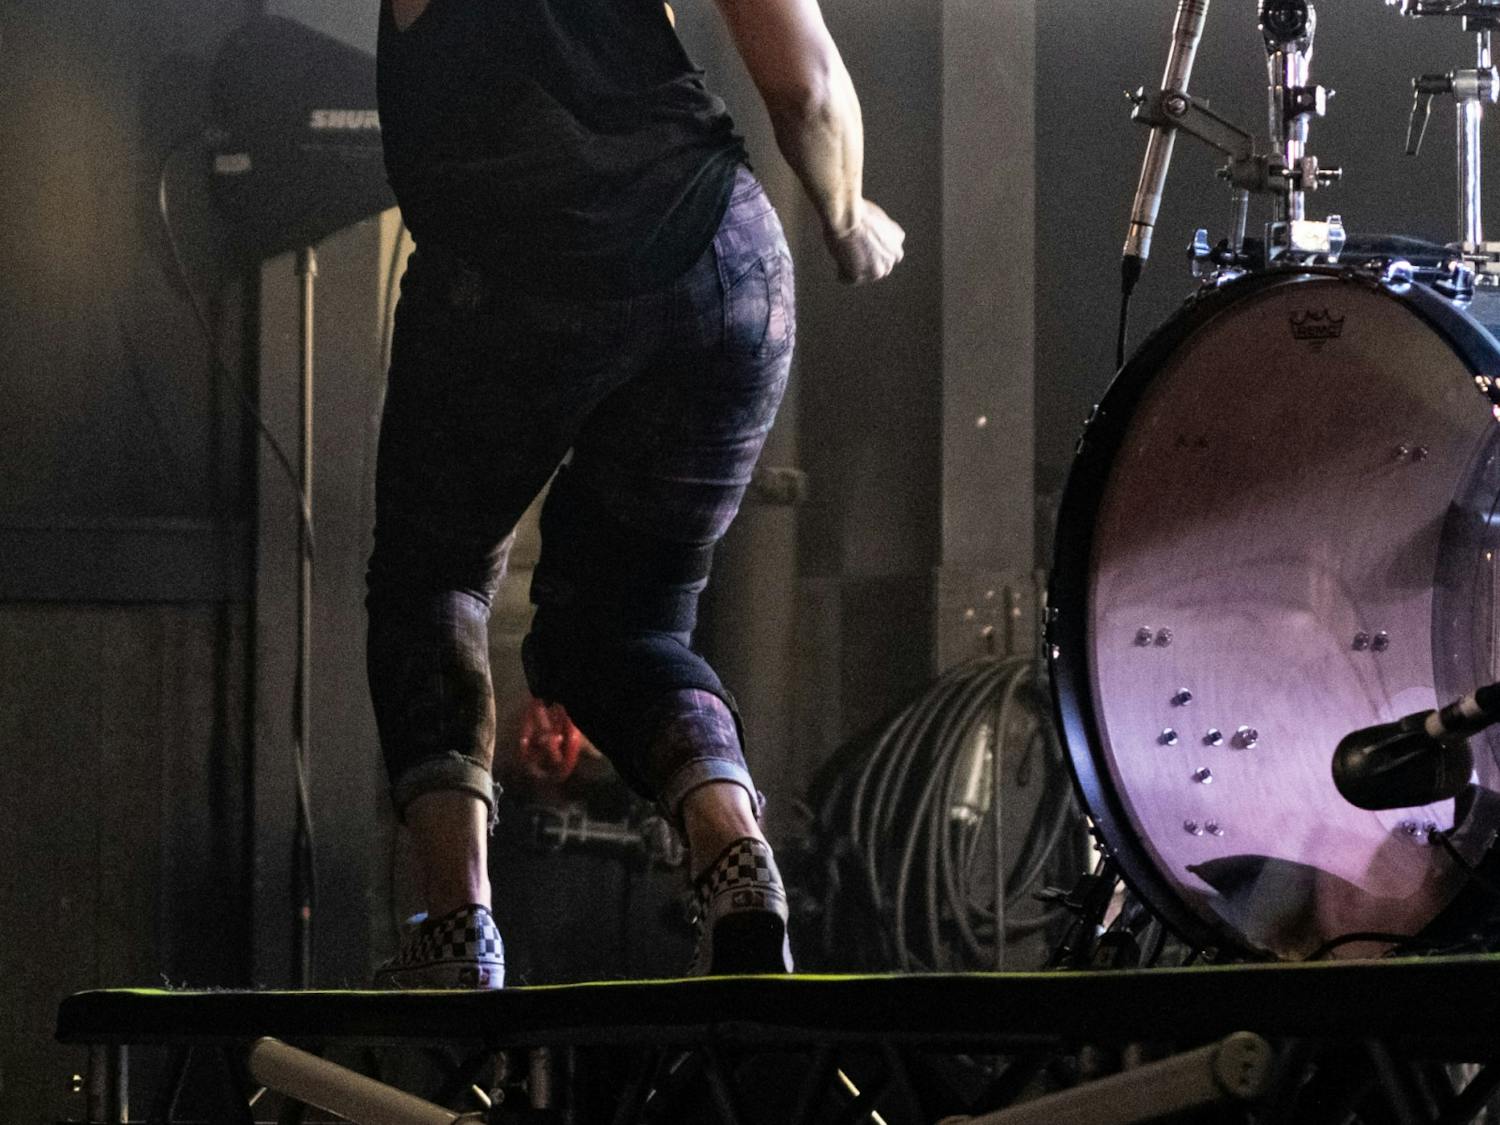 Kim Schifino dances between songs at their concert Nov. 17, 2019. Despite wearing a knee brace from a previous injury during shows, Schifino was very active on stage.